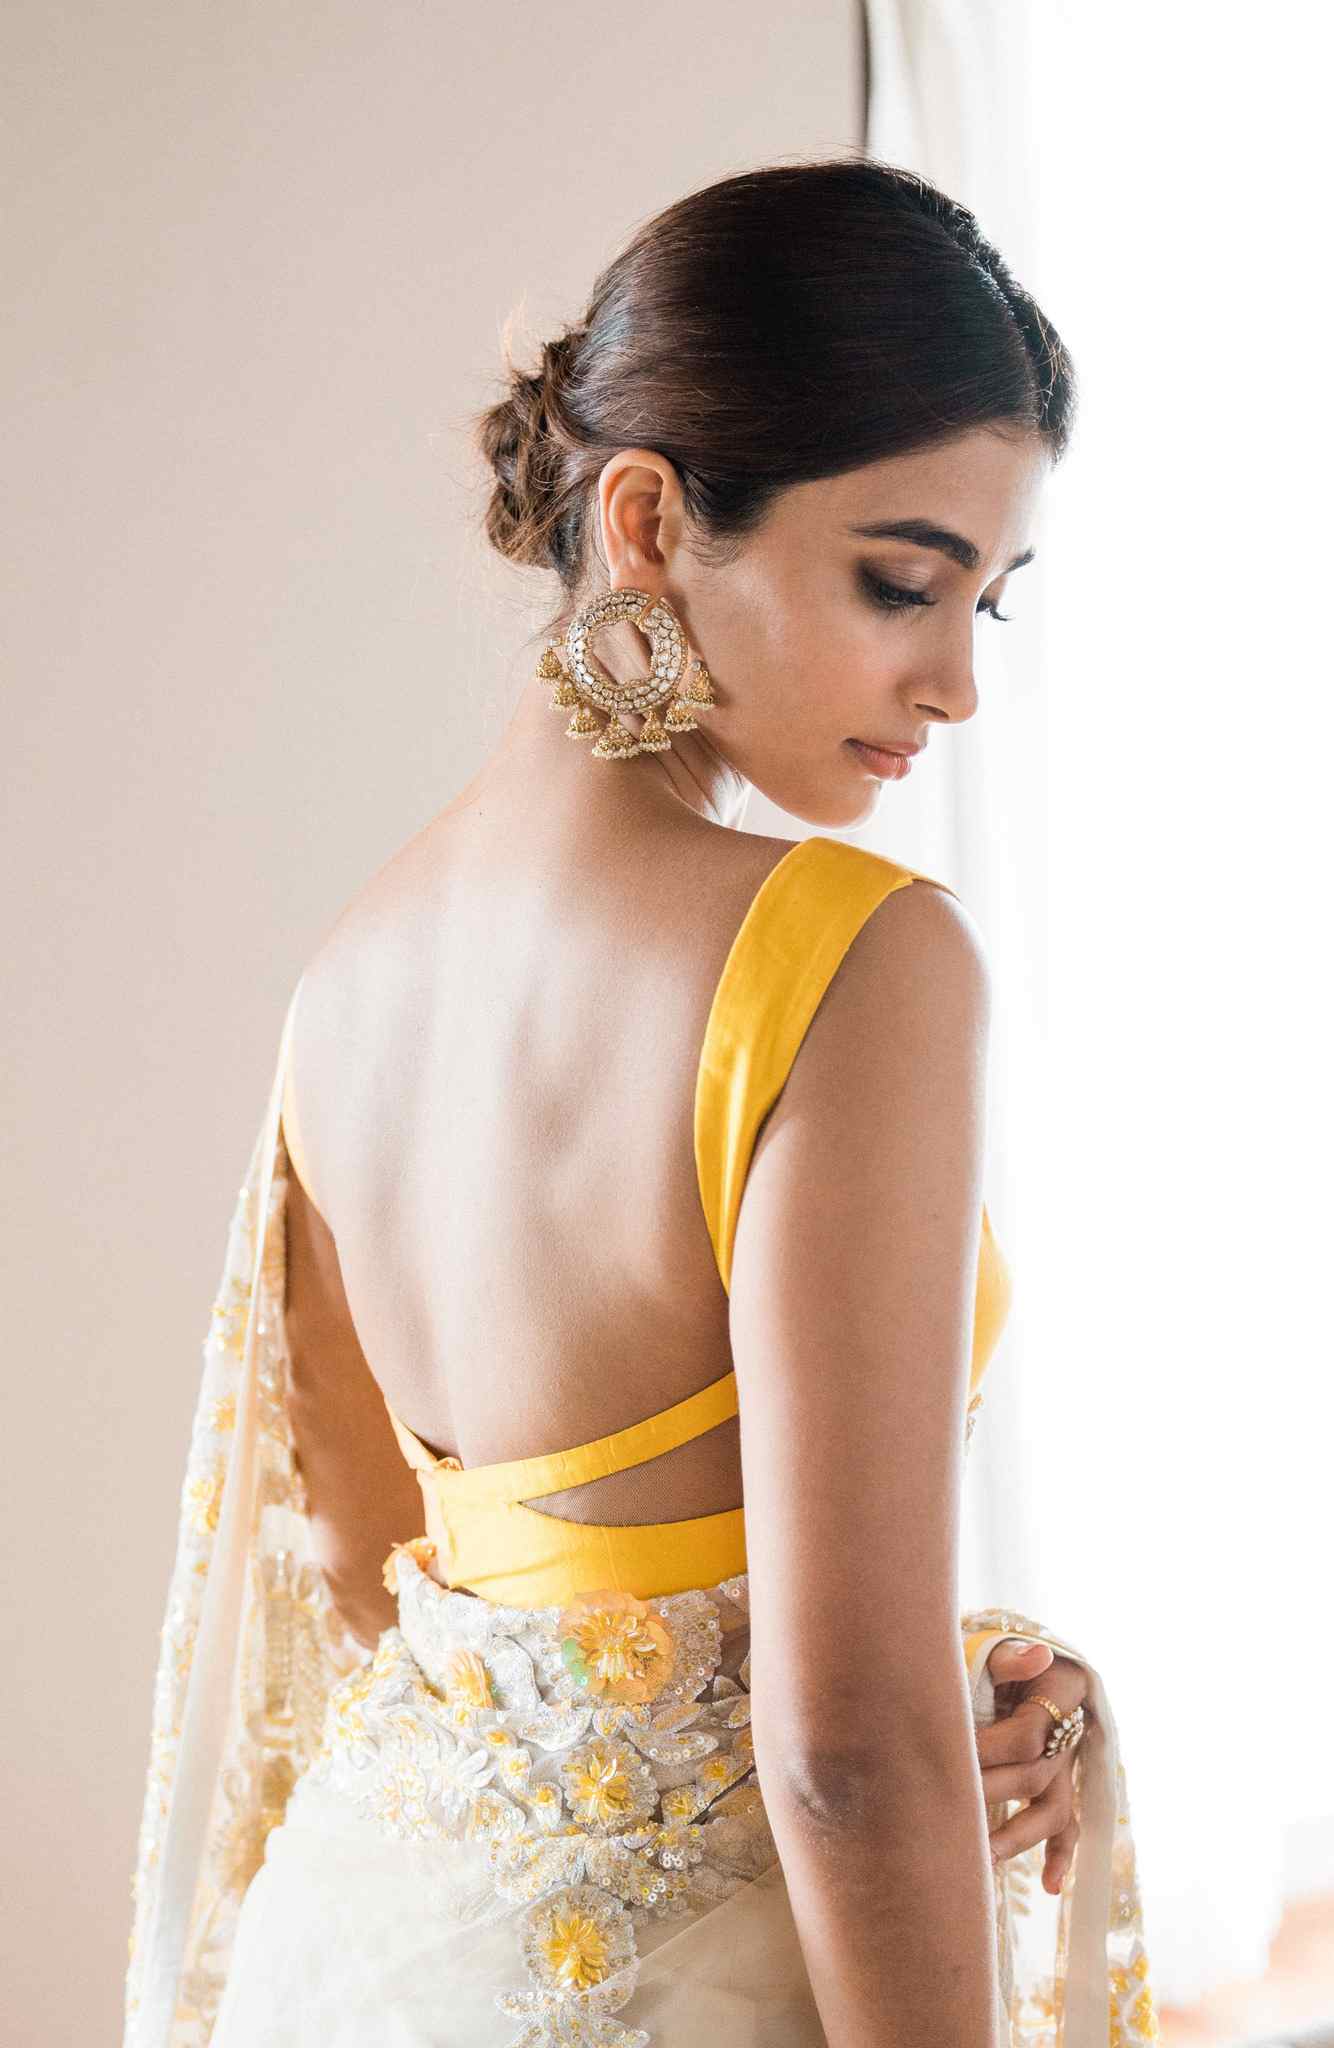 Pooja Hegde To Represent India At Cannes 2022